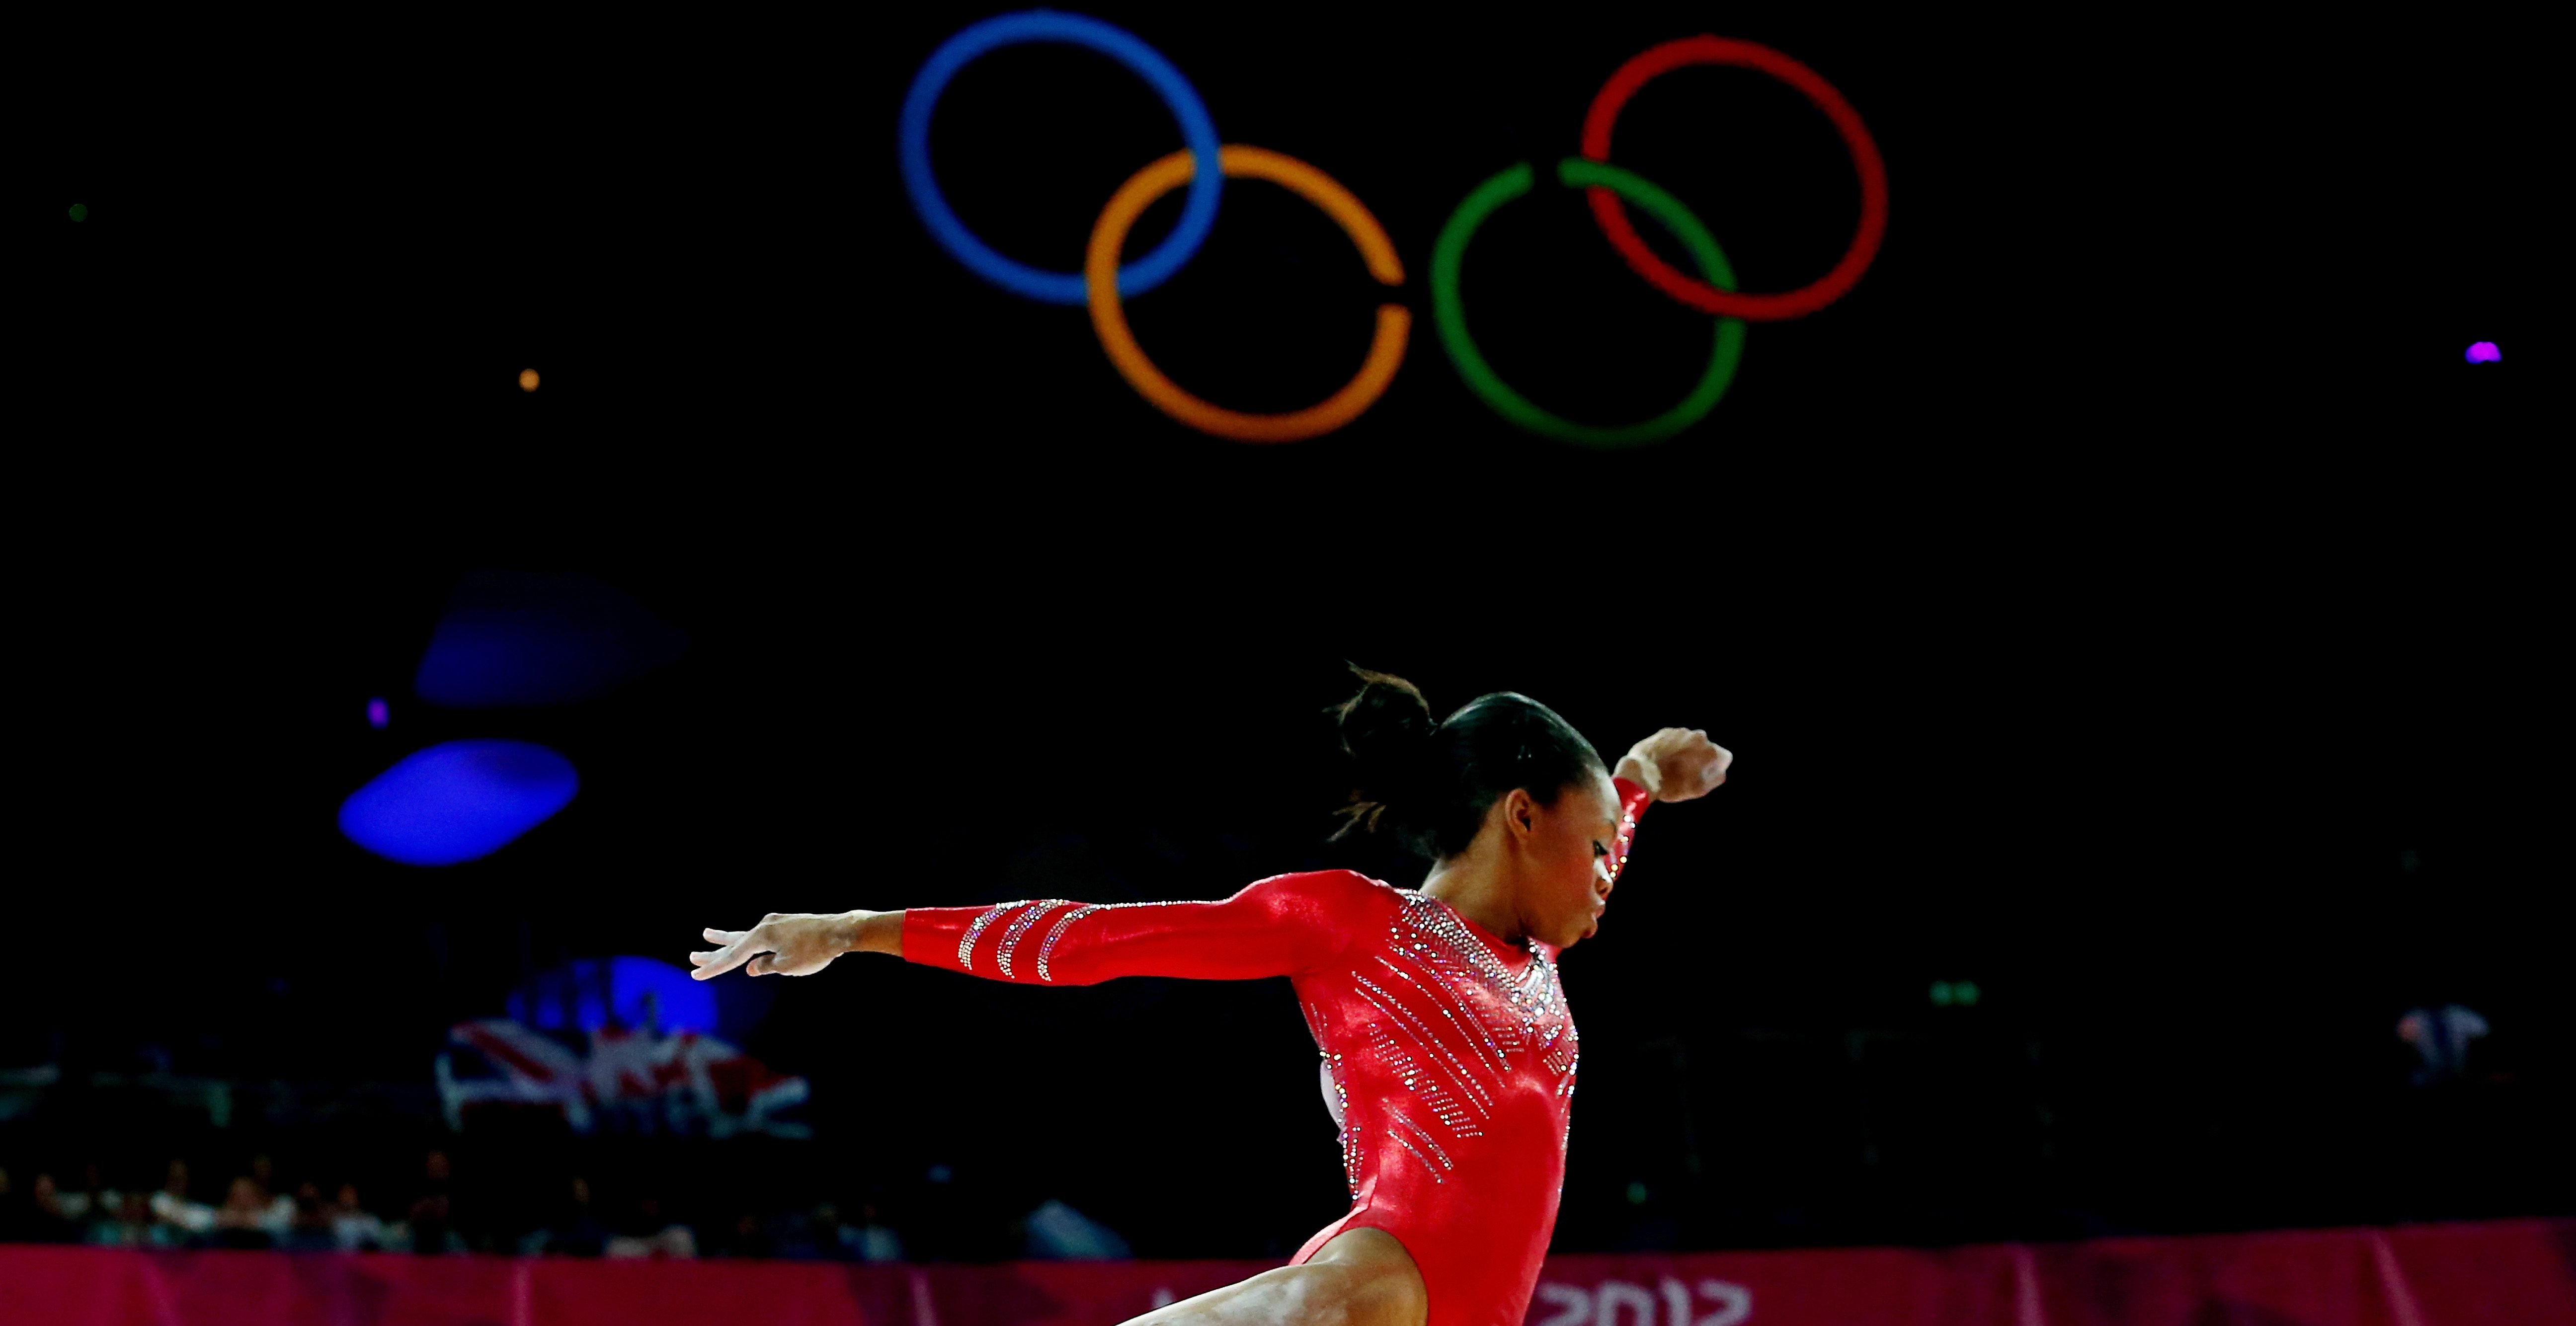 LONDON, ENGLAND - JULY 31: Gabrielle Douglas of the United States of America competes on the balance beam in the Artistic Gymnastics Women's Team final on Day 4 of the London 2012 Olympic Games at North Greenwich Arena on July 31, 2012 in London, England.